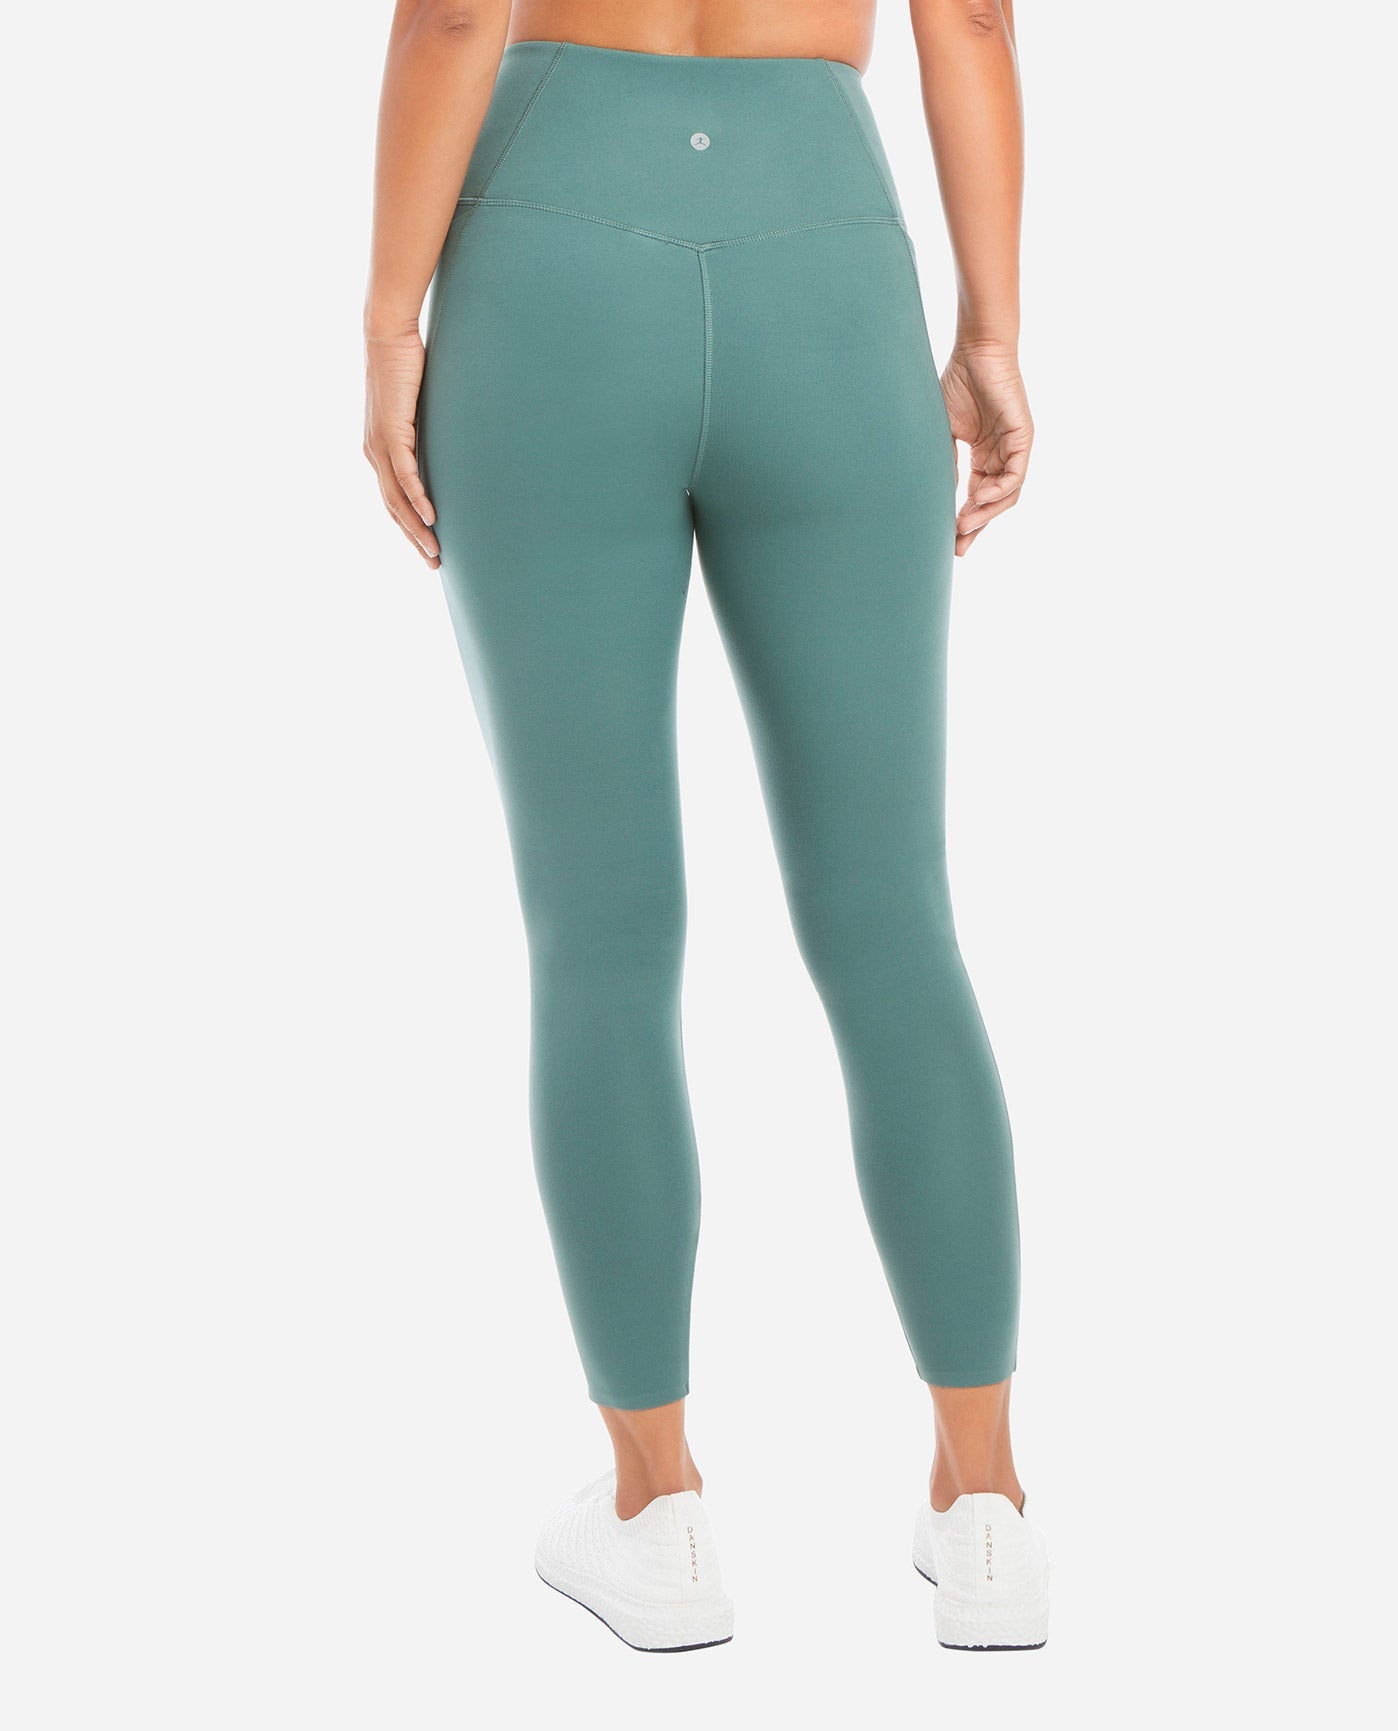 High Waist Lycra Danskin Petite Yoga Pants For Women Solid Color Sportswear  For Gym, Fitness, And Outdoor Activities From Orangeclothing_115, $18.89